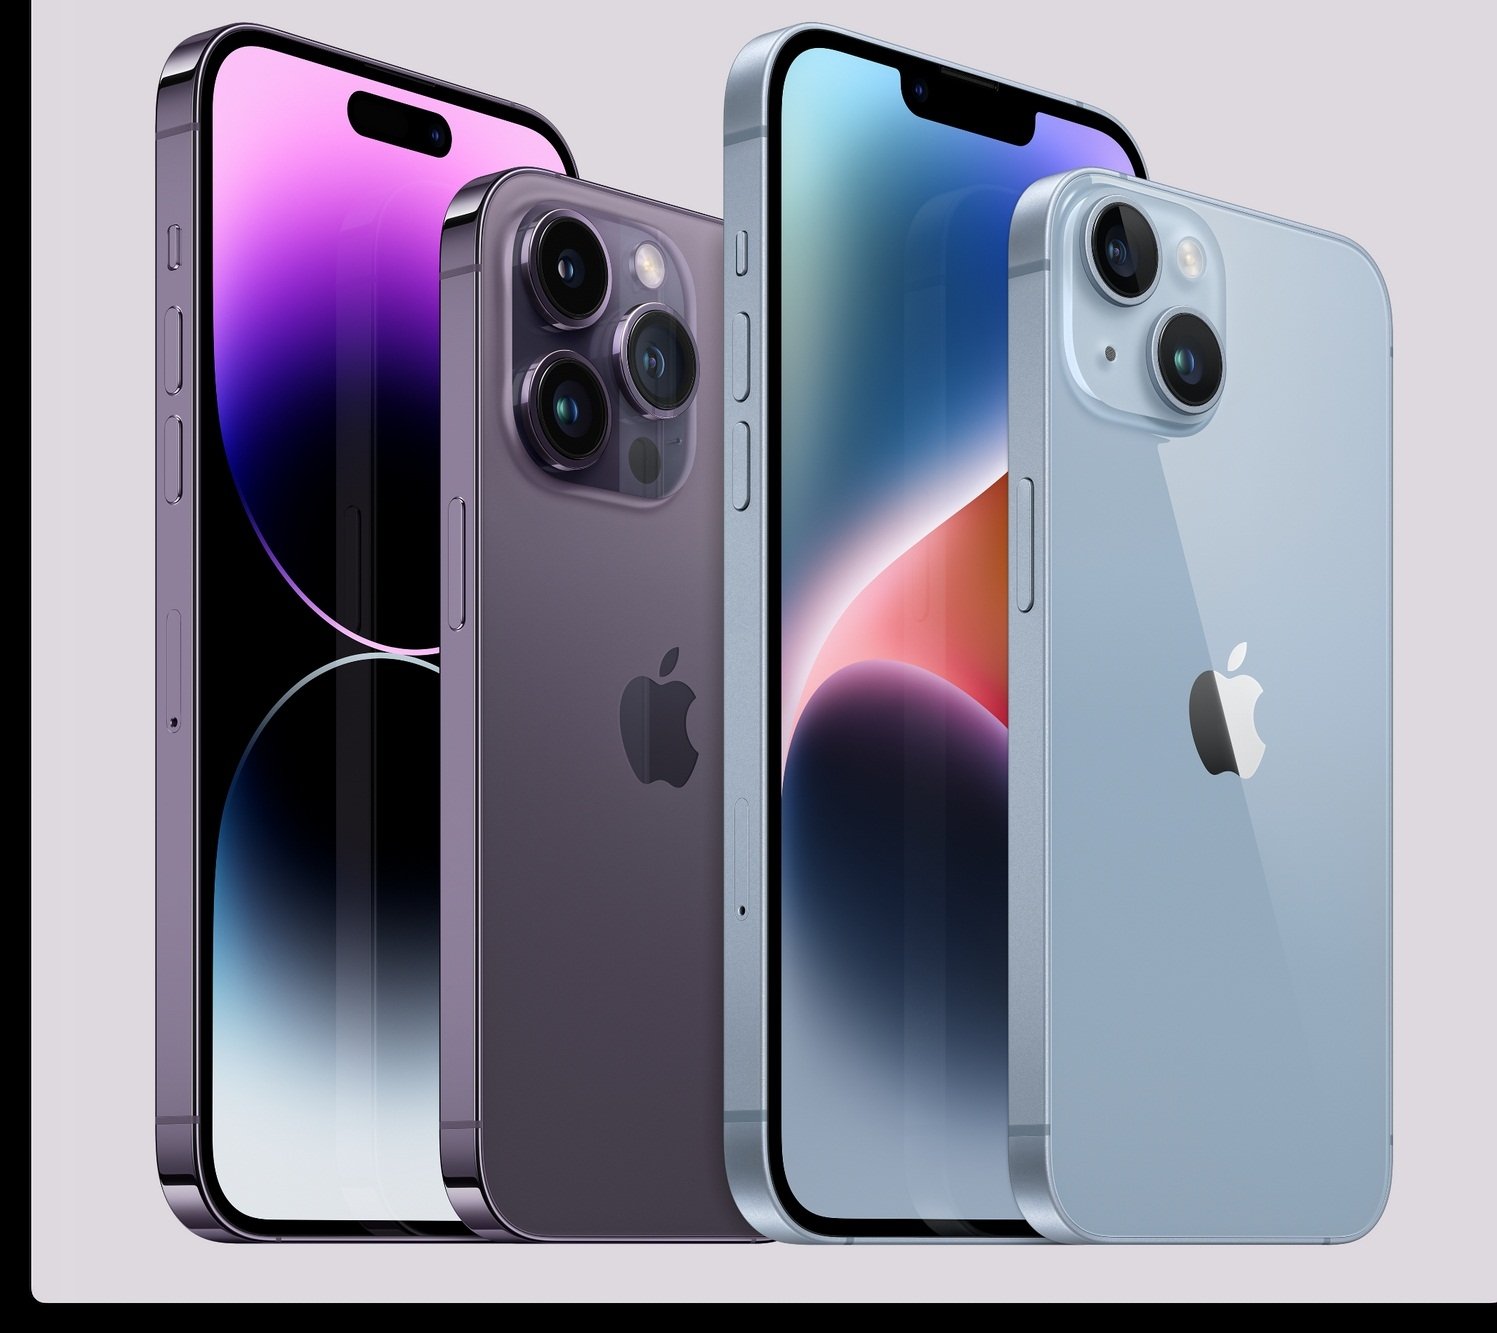 Apple iPhones, 14 and 14 Pro